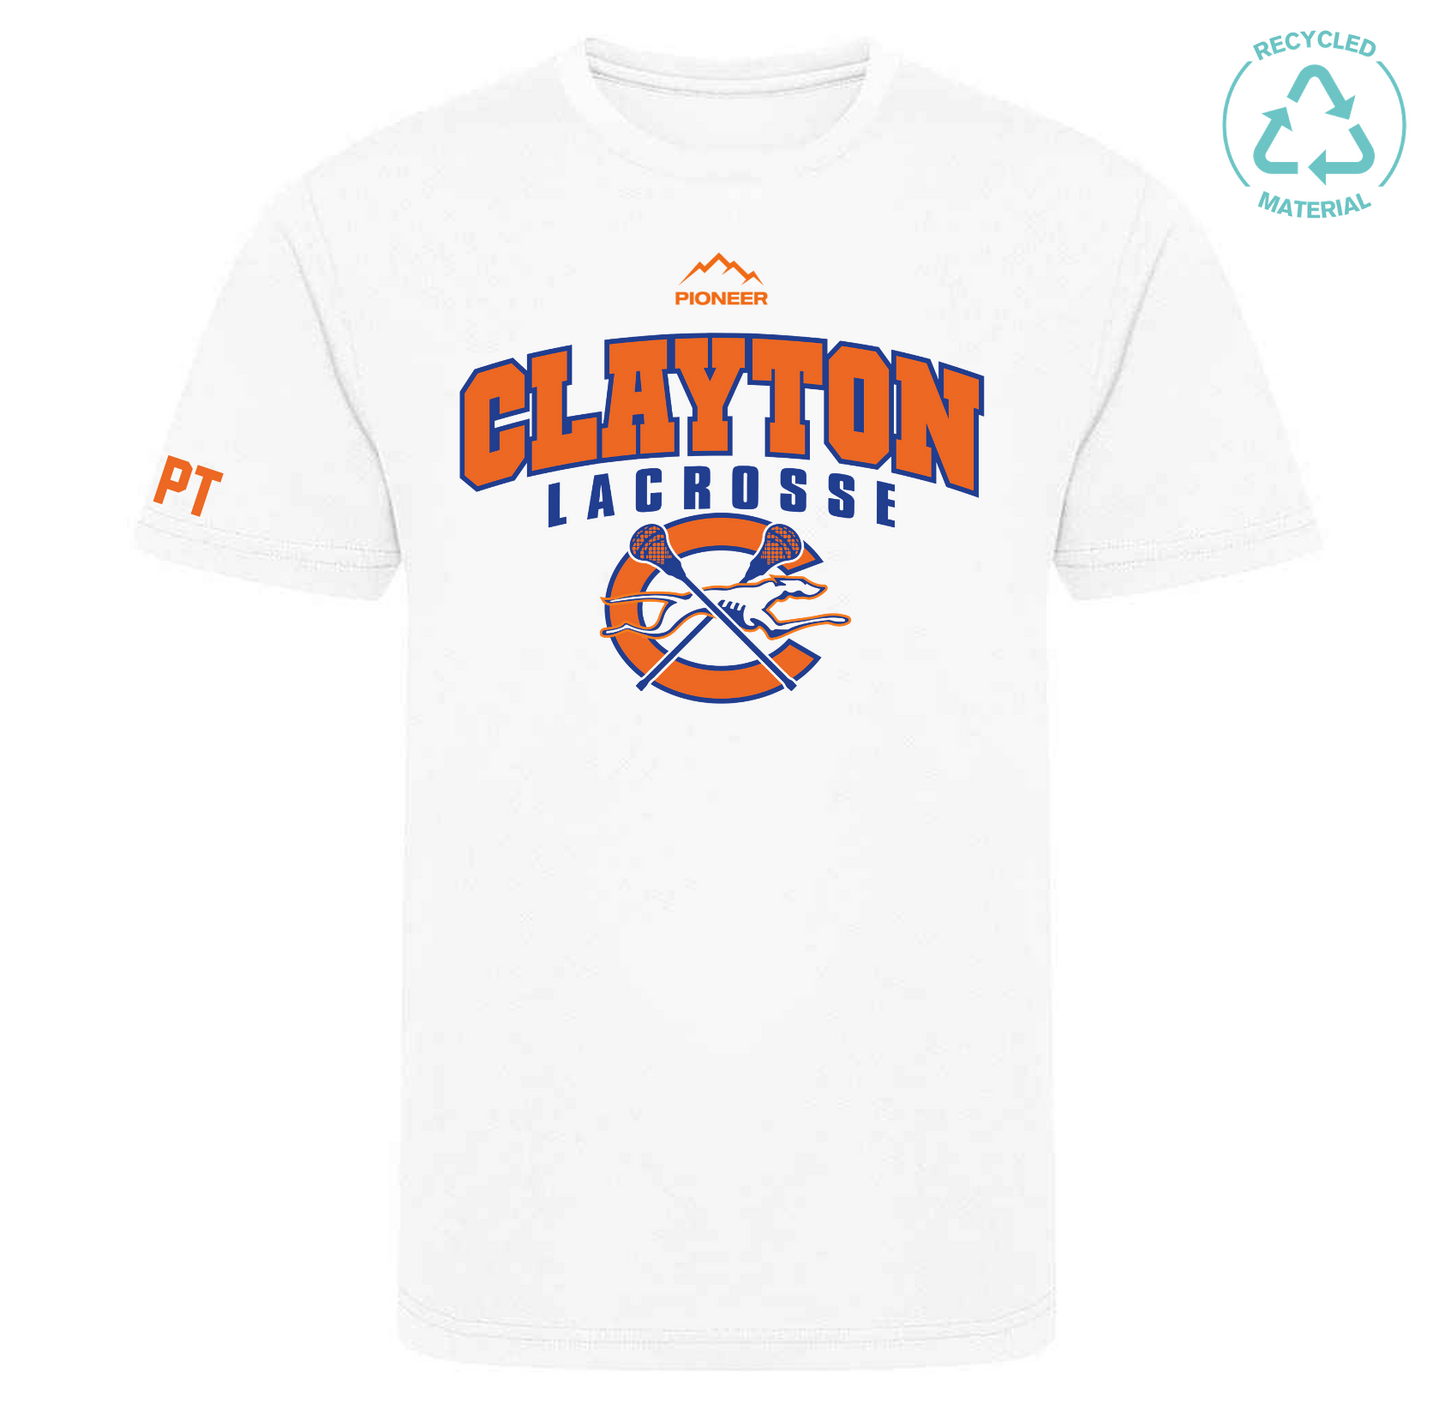 Clayton Lacrosse Recycled Tech Tee